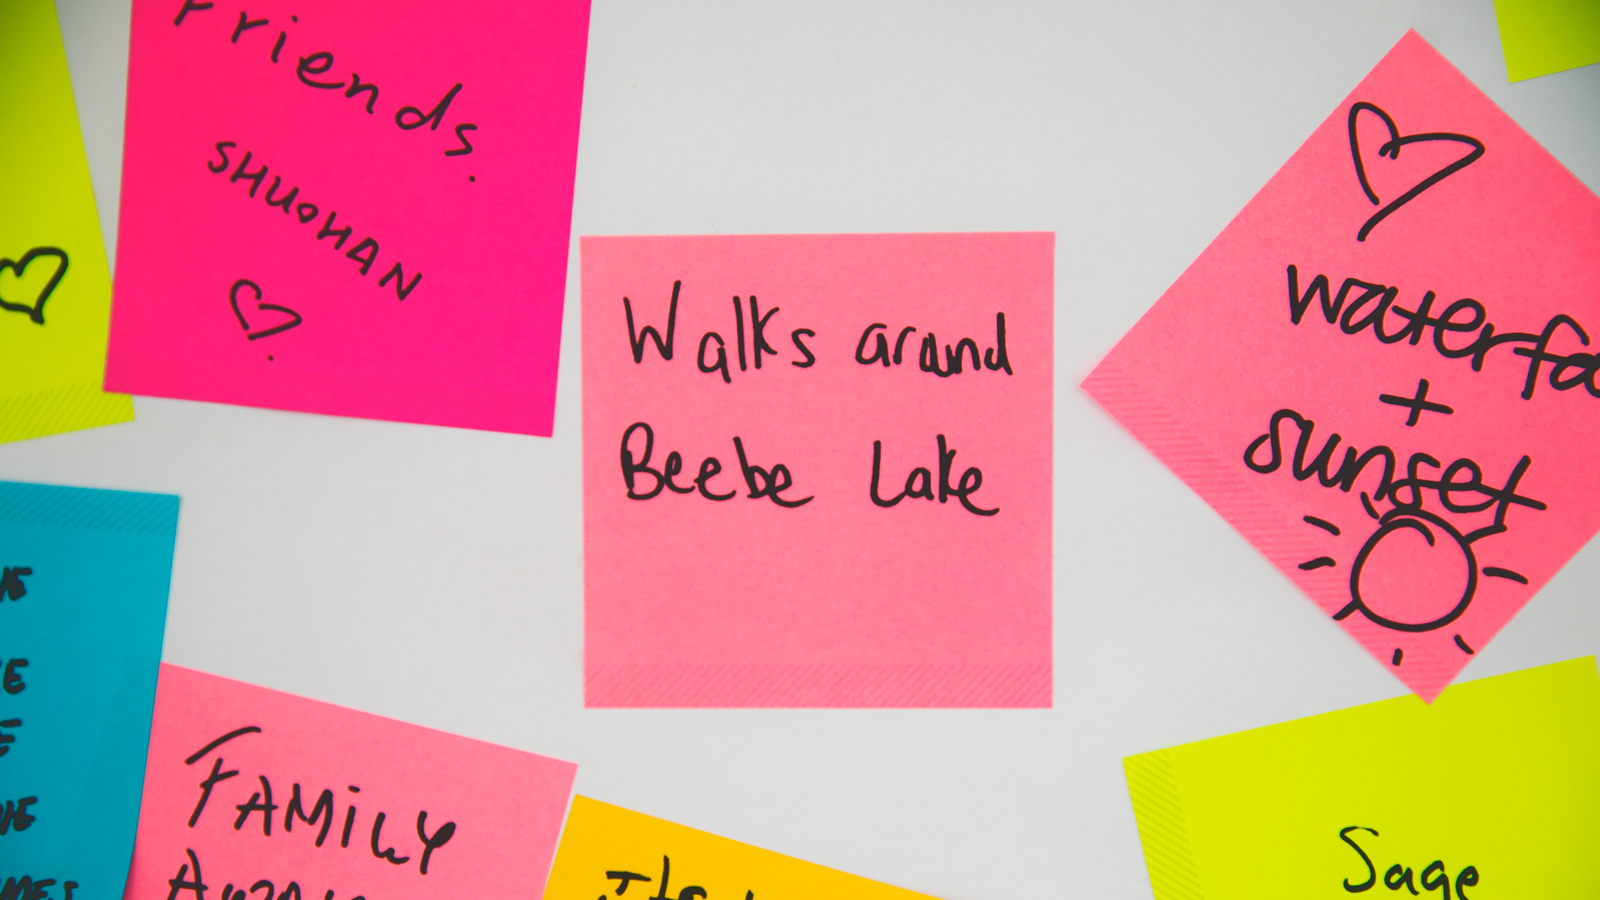 Image of multiple Post-It notes, some of which say: Friends, Shuohan; walks around Beebe Lake; and waterfalls + Sunset.